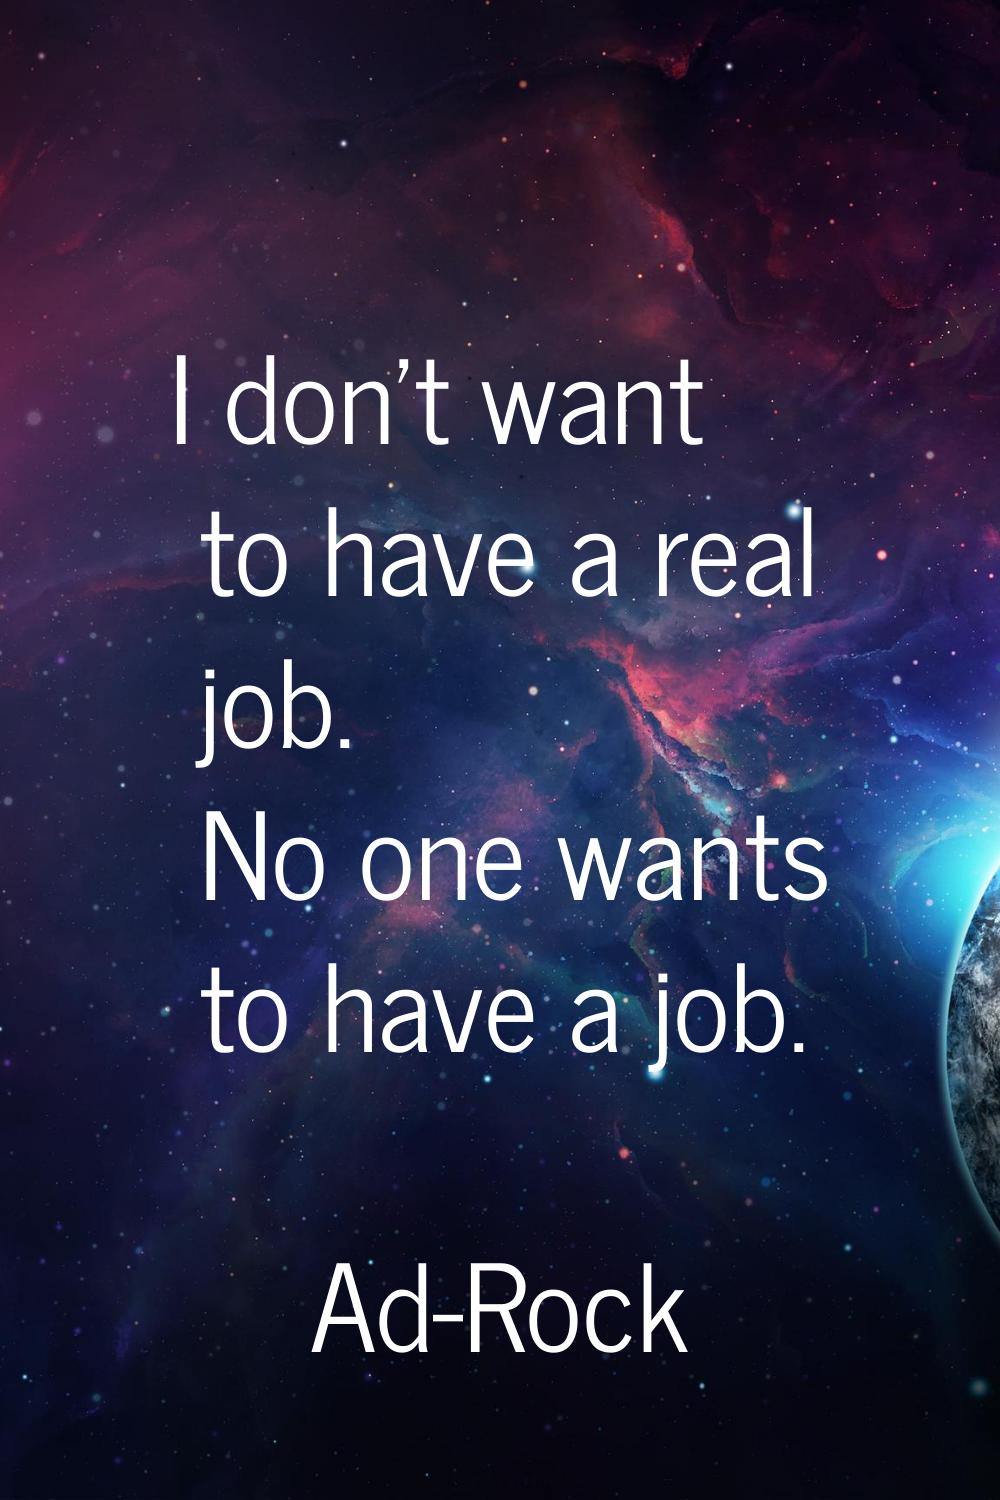 I don't want to have a real job. No one wants to have a job.